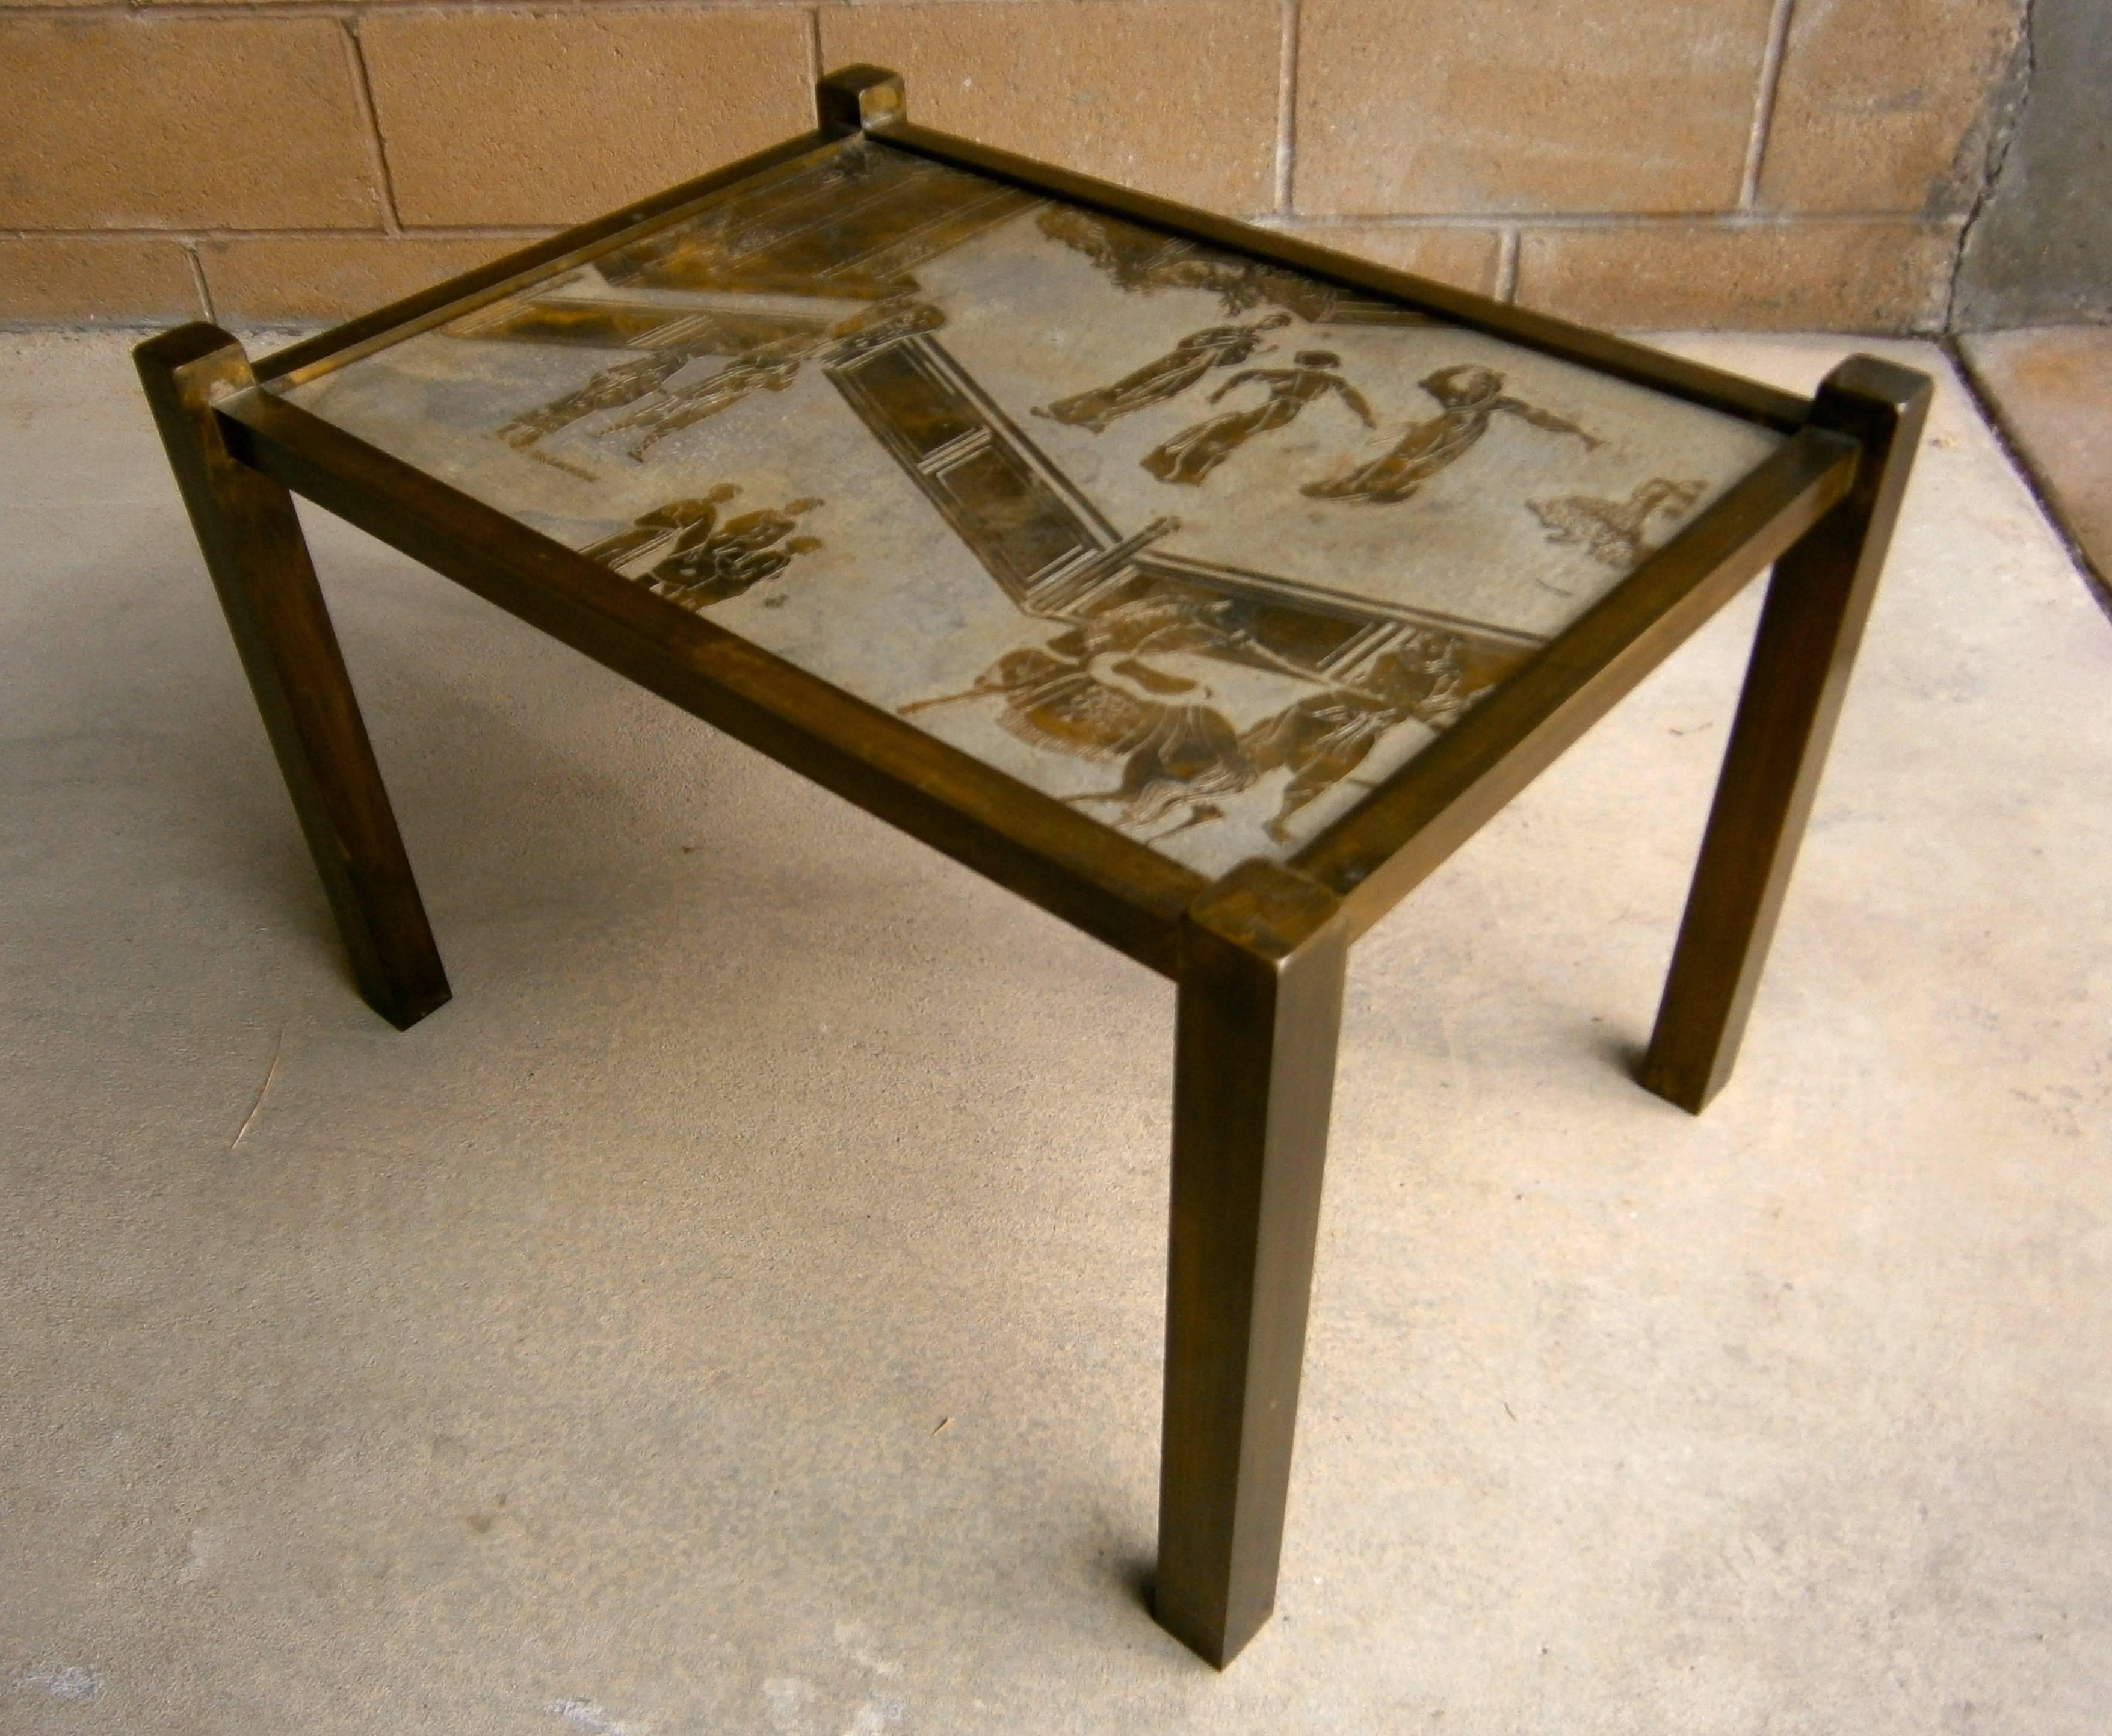 A bronze and etched pewter Tao side table by father and son artisans Philip and Kelvin Laverne from the 1970's. The etched signature P. K. Laverne is present.
Obtained from the original owner's home in Palm Springs.